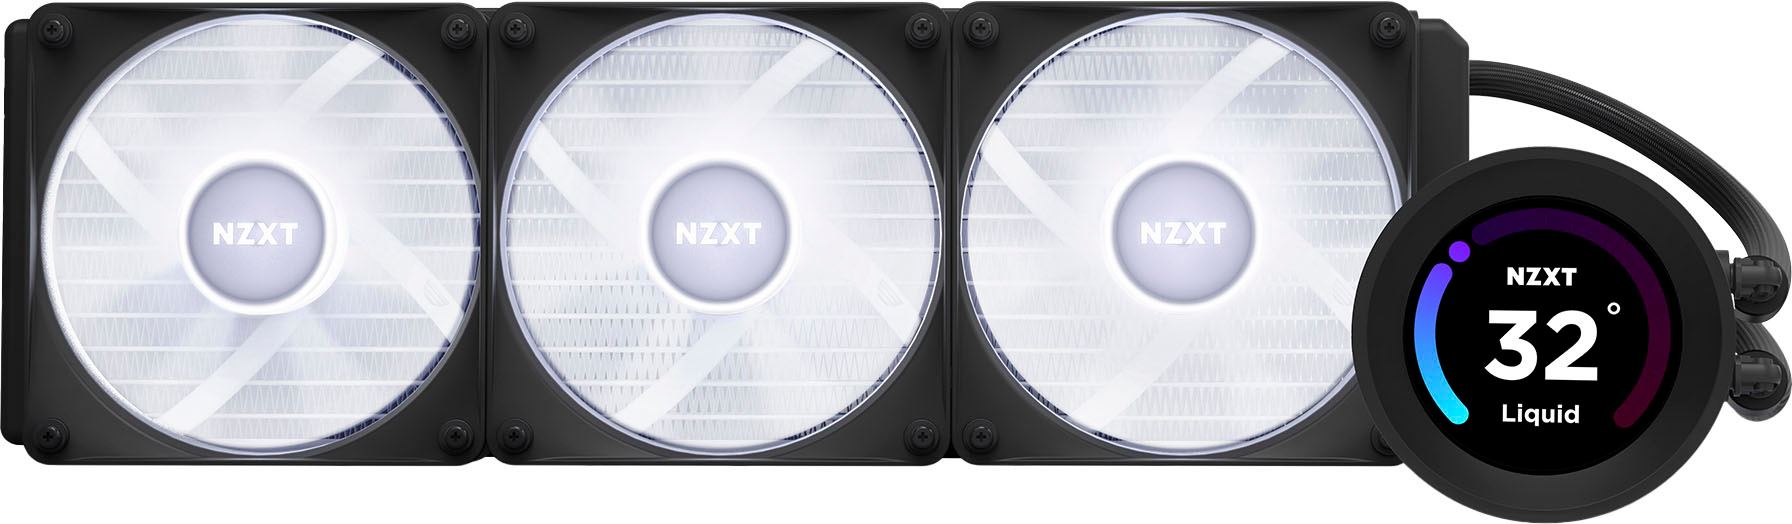 NZXT Kraken Elite 360 120mm Fans + AIO 360mm Radiator Liquid Cooling System  with 2.36 wide-angle LCD display and RGB Fans Black RL-KR36E-B1 - Best Buy